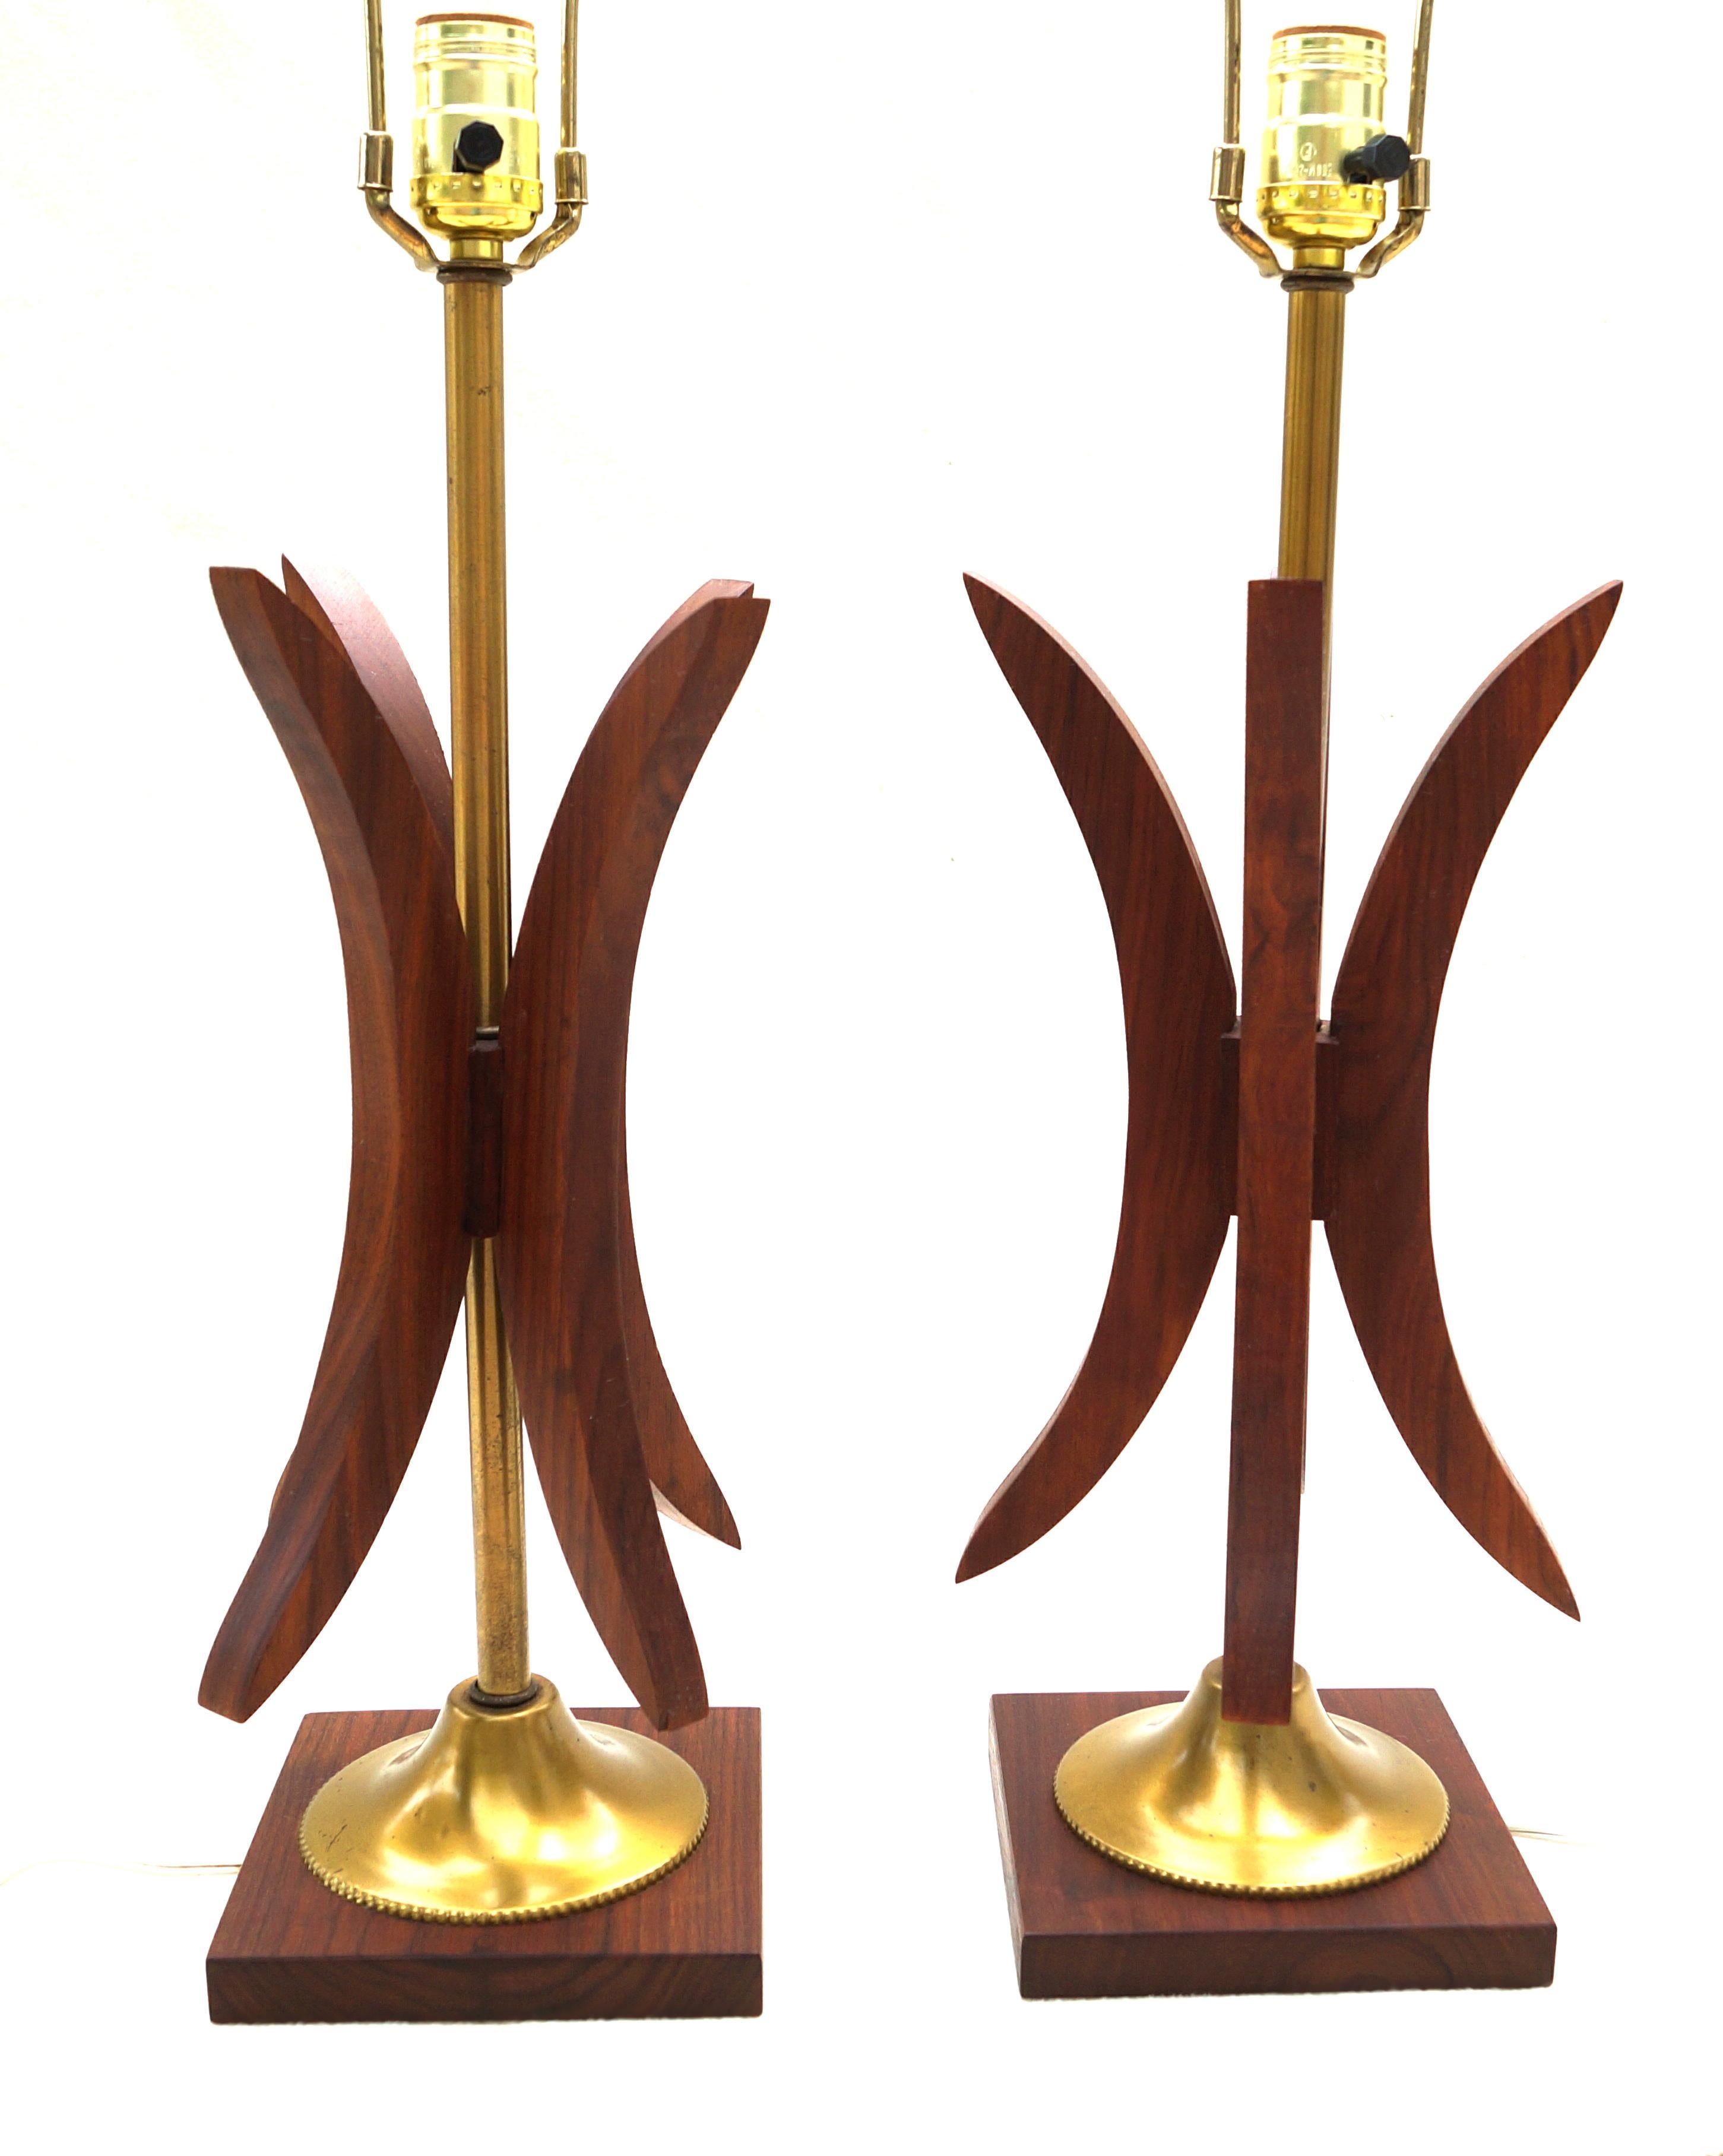 Mid-20th Century Pair of Adrian Pearsall Attrib Sculptural Table Lamps Danish Mid-Century Modern For Sale